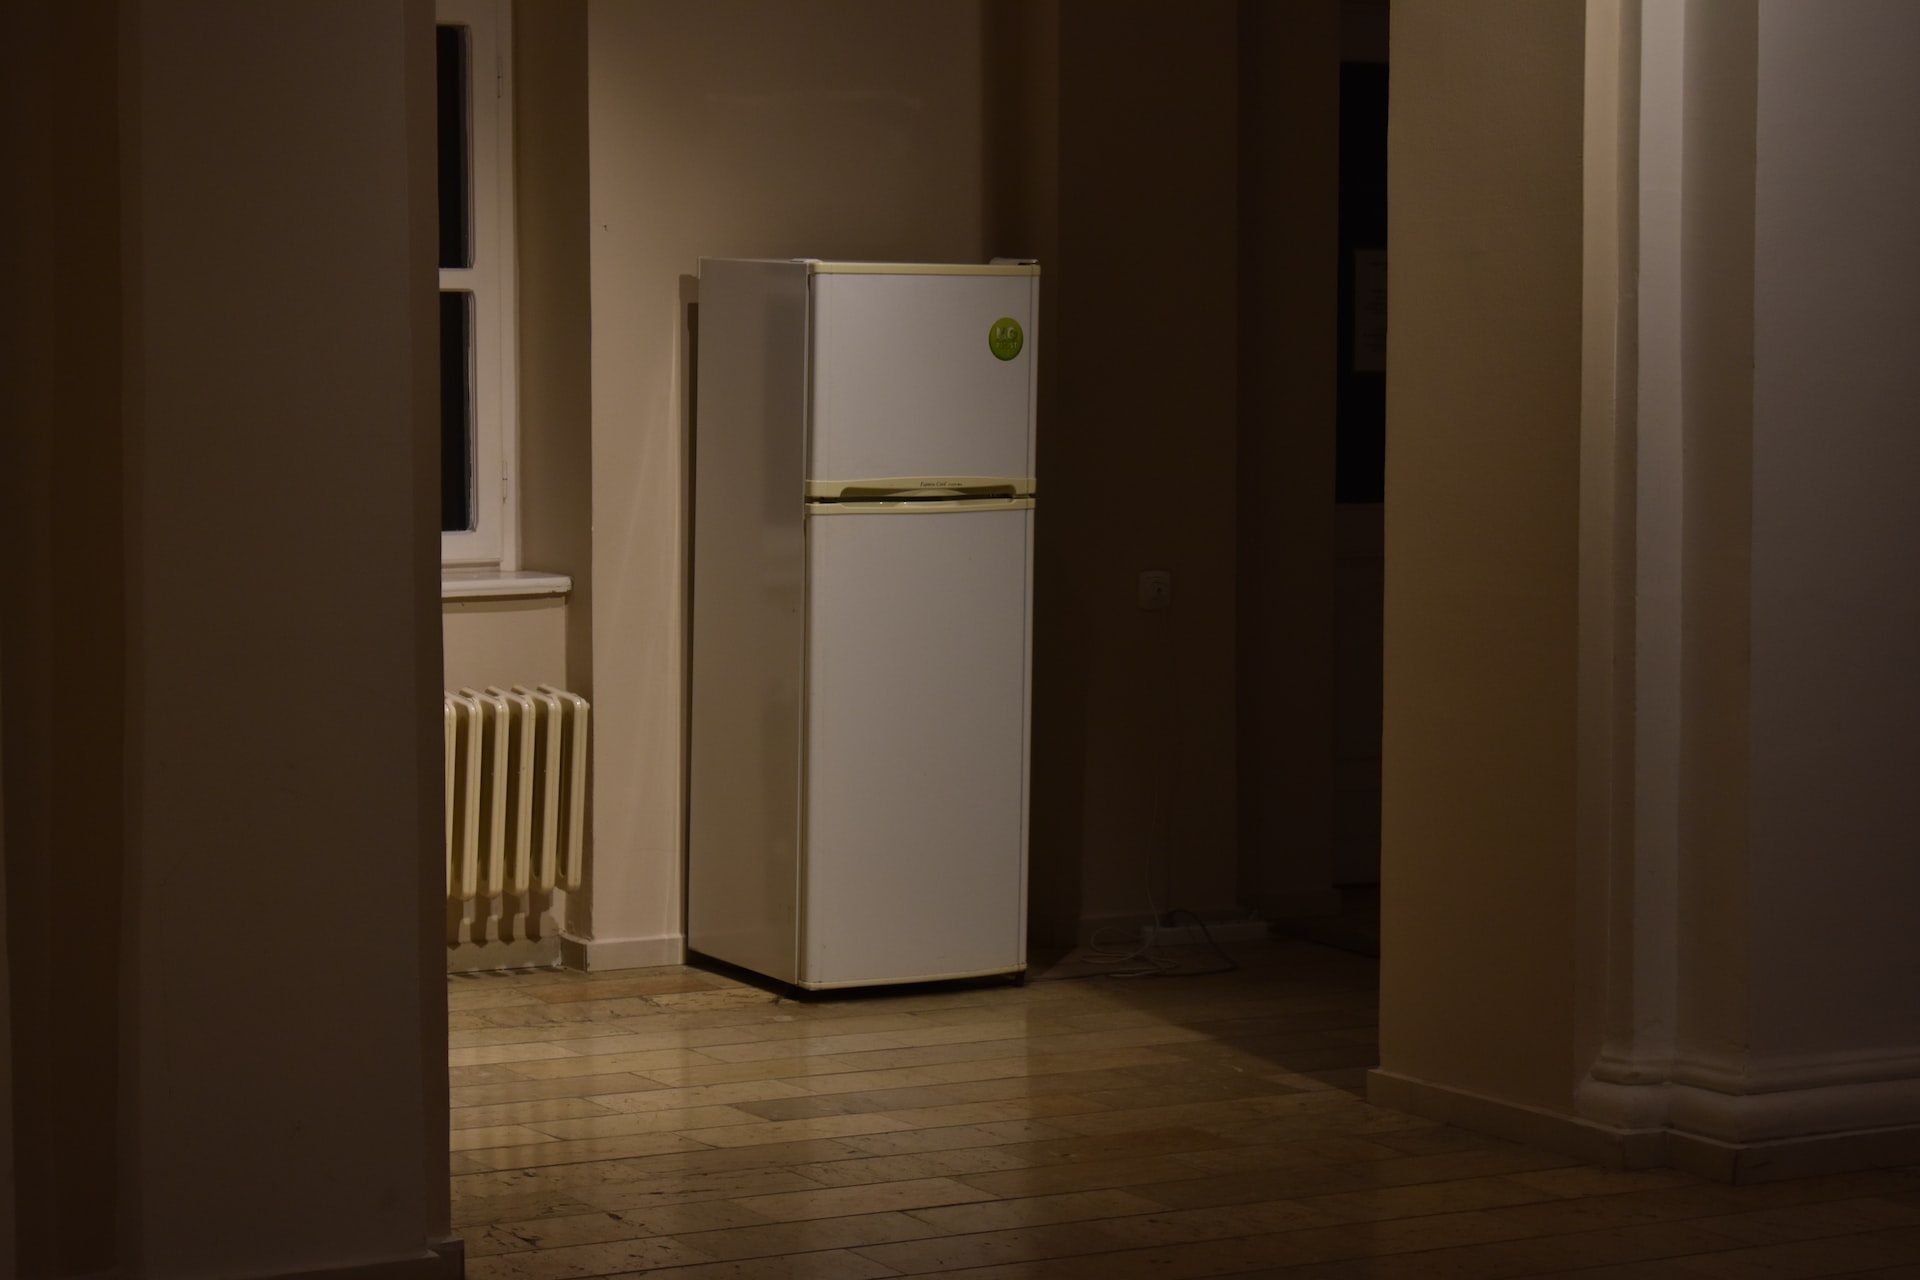 Get $125 for recycling your old fridge or freezer